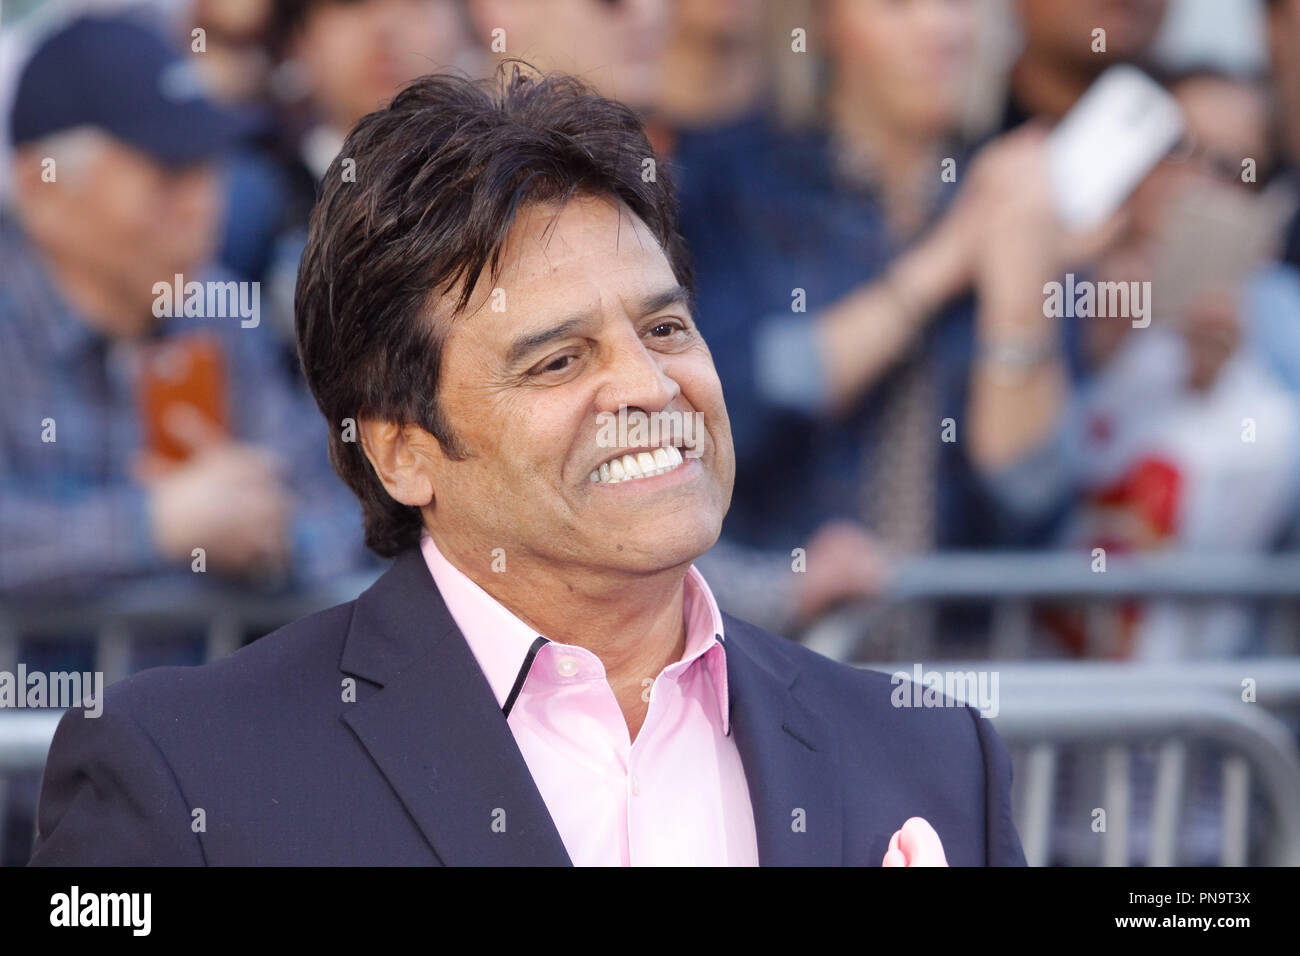 Erik Estrada at the Premiere of Warner Bros' 'CHIPS' held at the TCL Chinese Theater in Hollywood, CA, March 20, 2017. Photo by Joseph Martinez / PictureLux Stock Photo